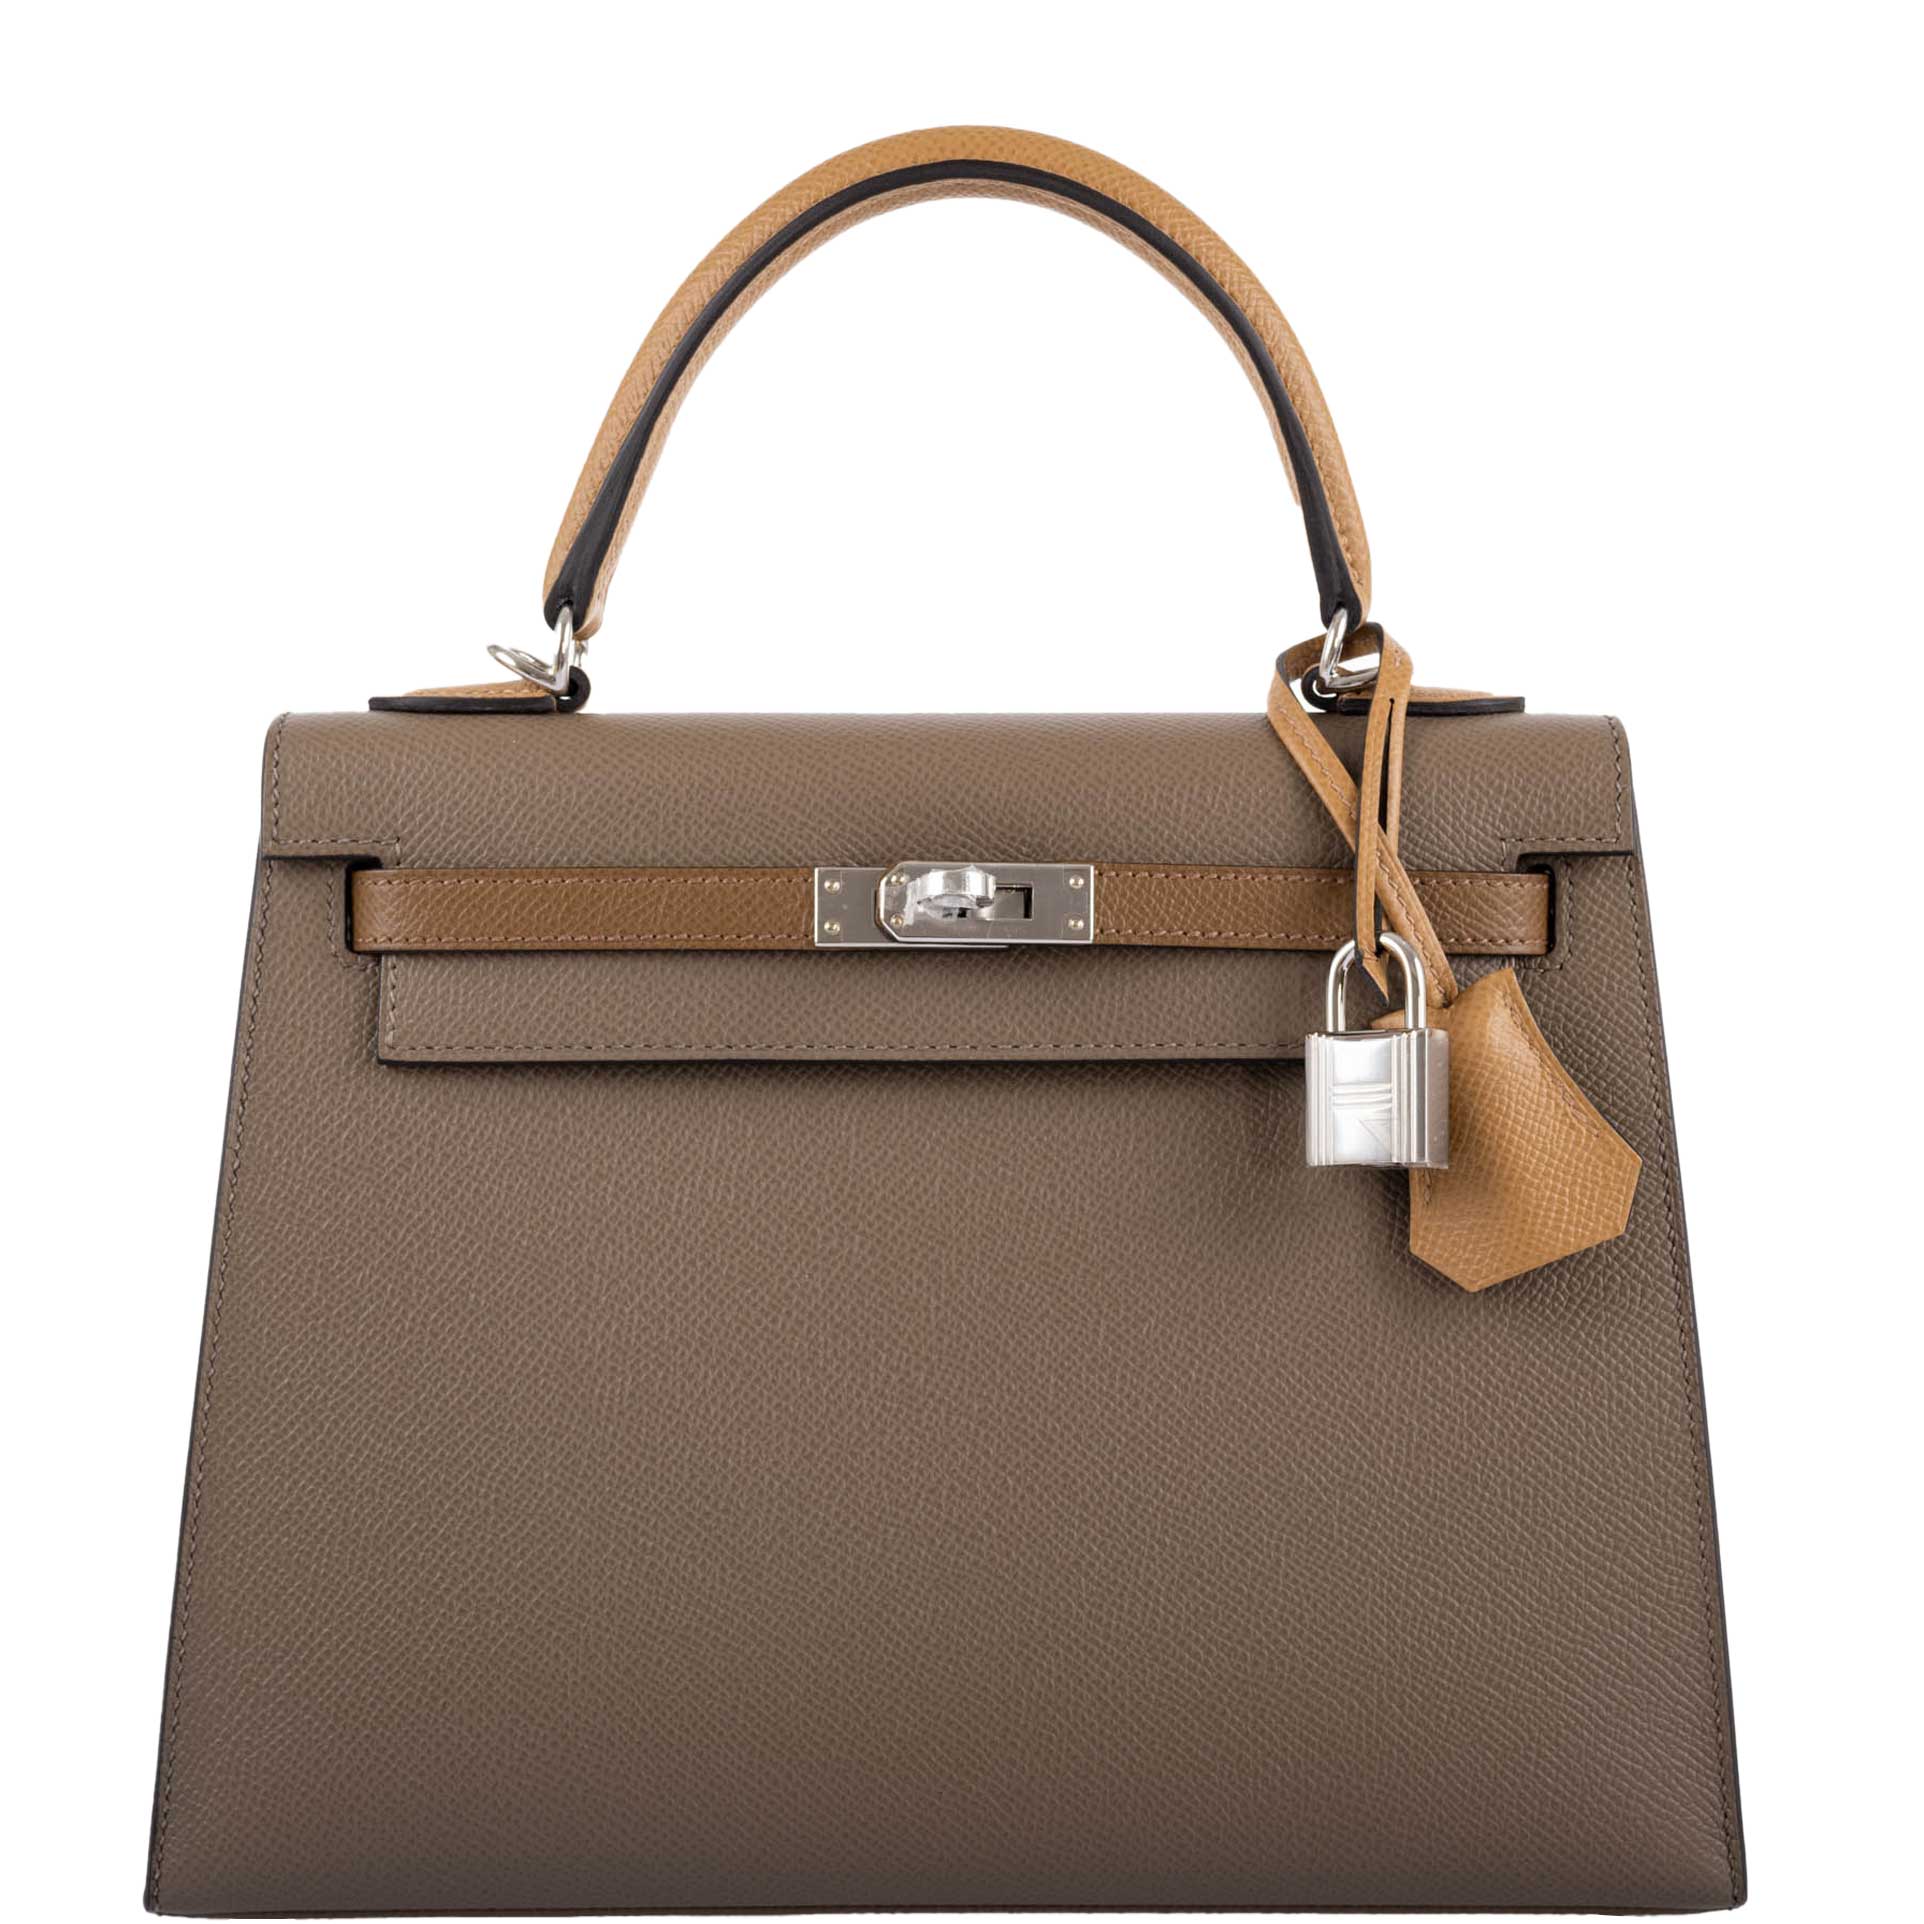 NEW Limited Edition HERMES Kelly 25 In & Out Bag 2021